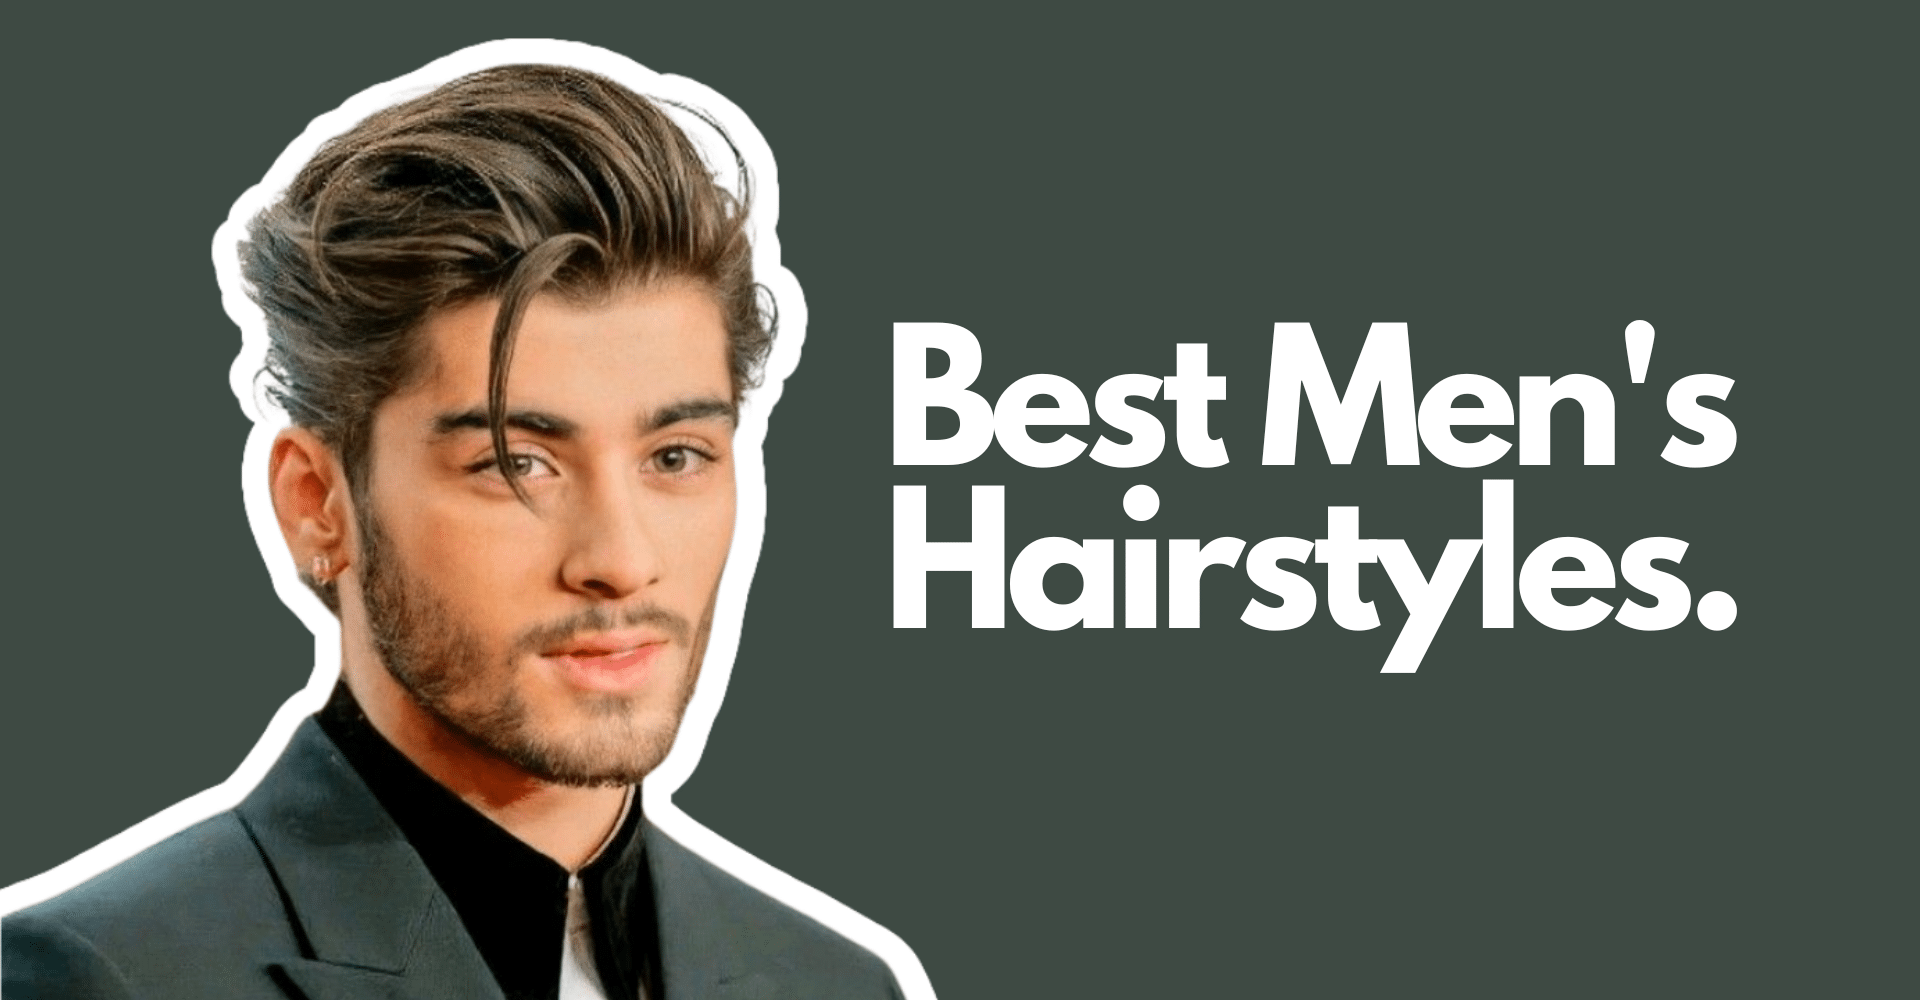 Top 20 Hair Style For Man || Top 20 Hair Style For Boy || Hair Style For  Man & Boy - Mixing Images